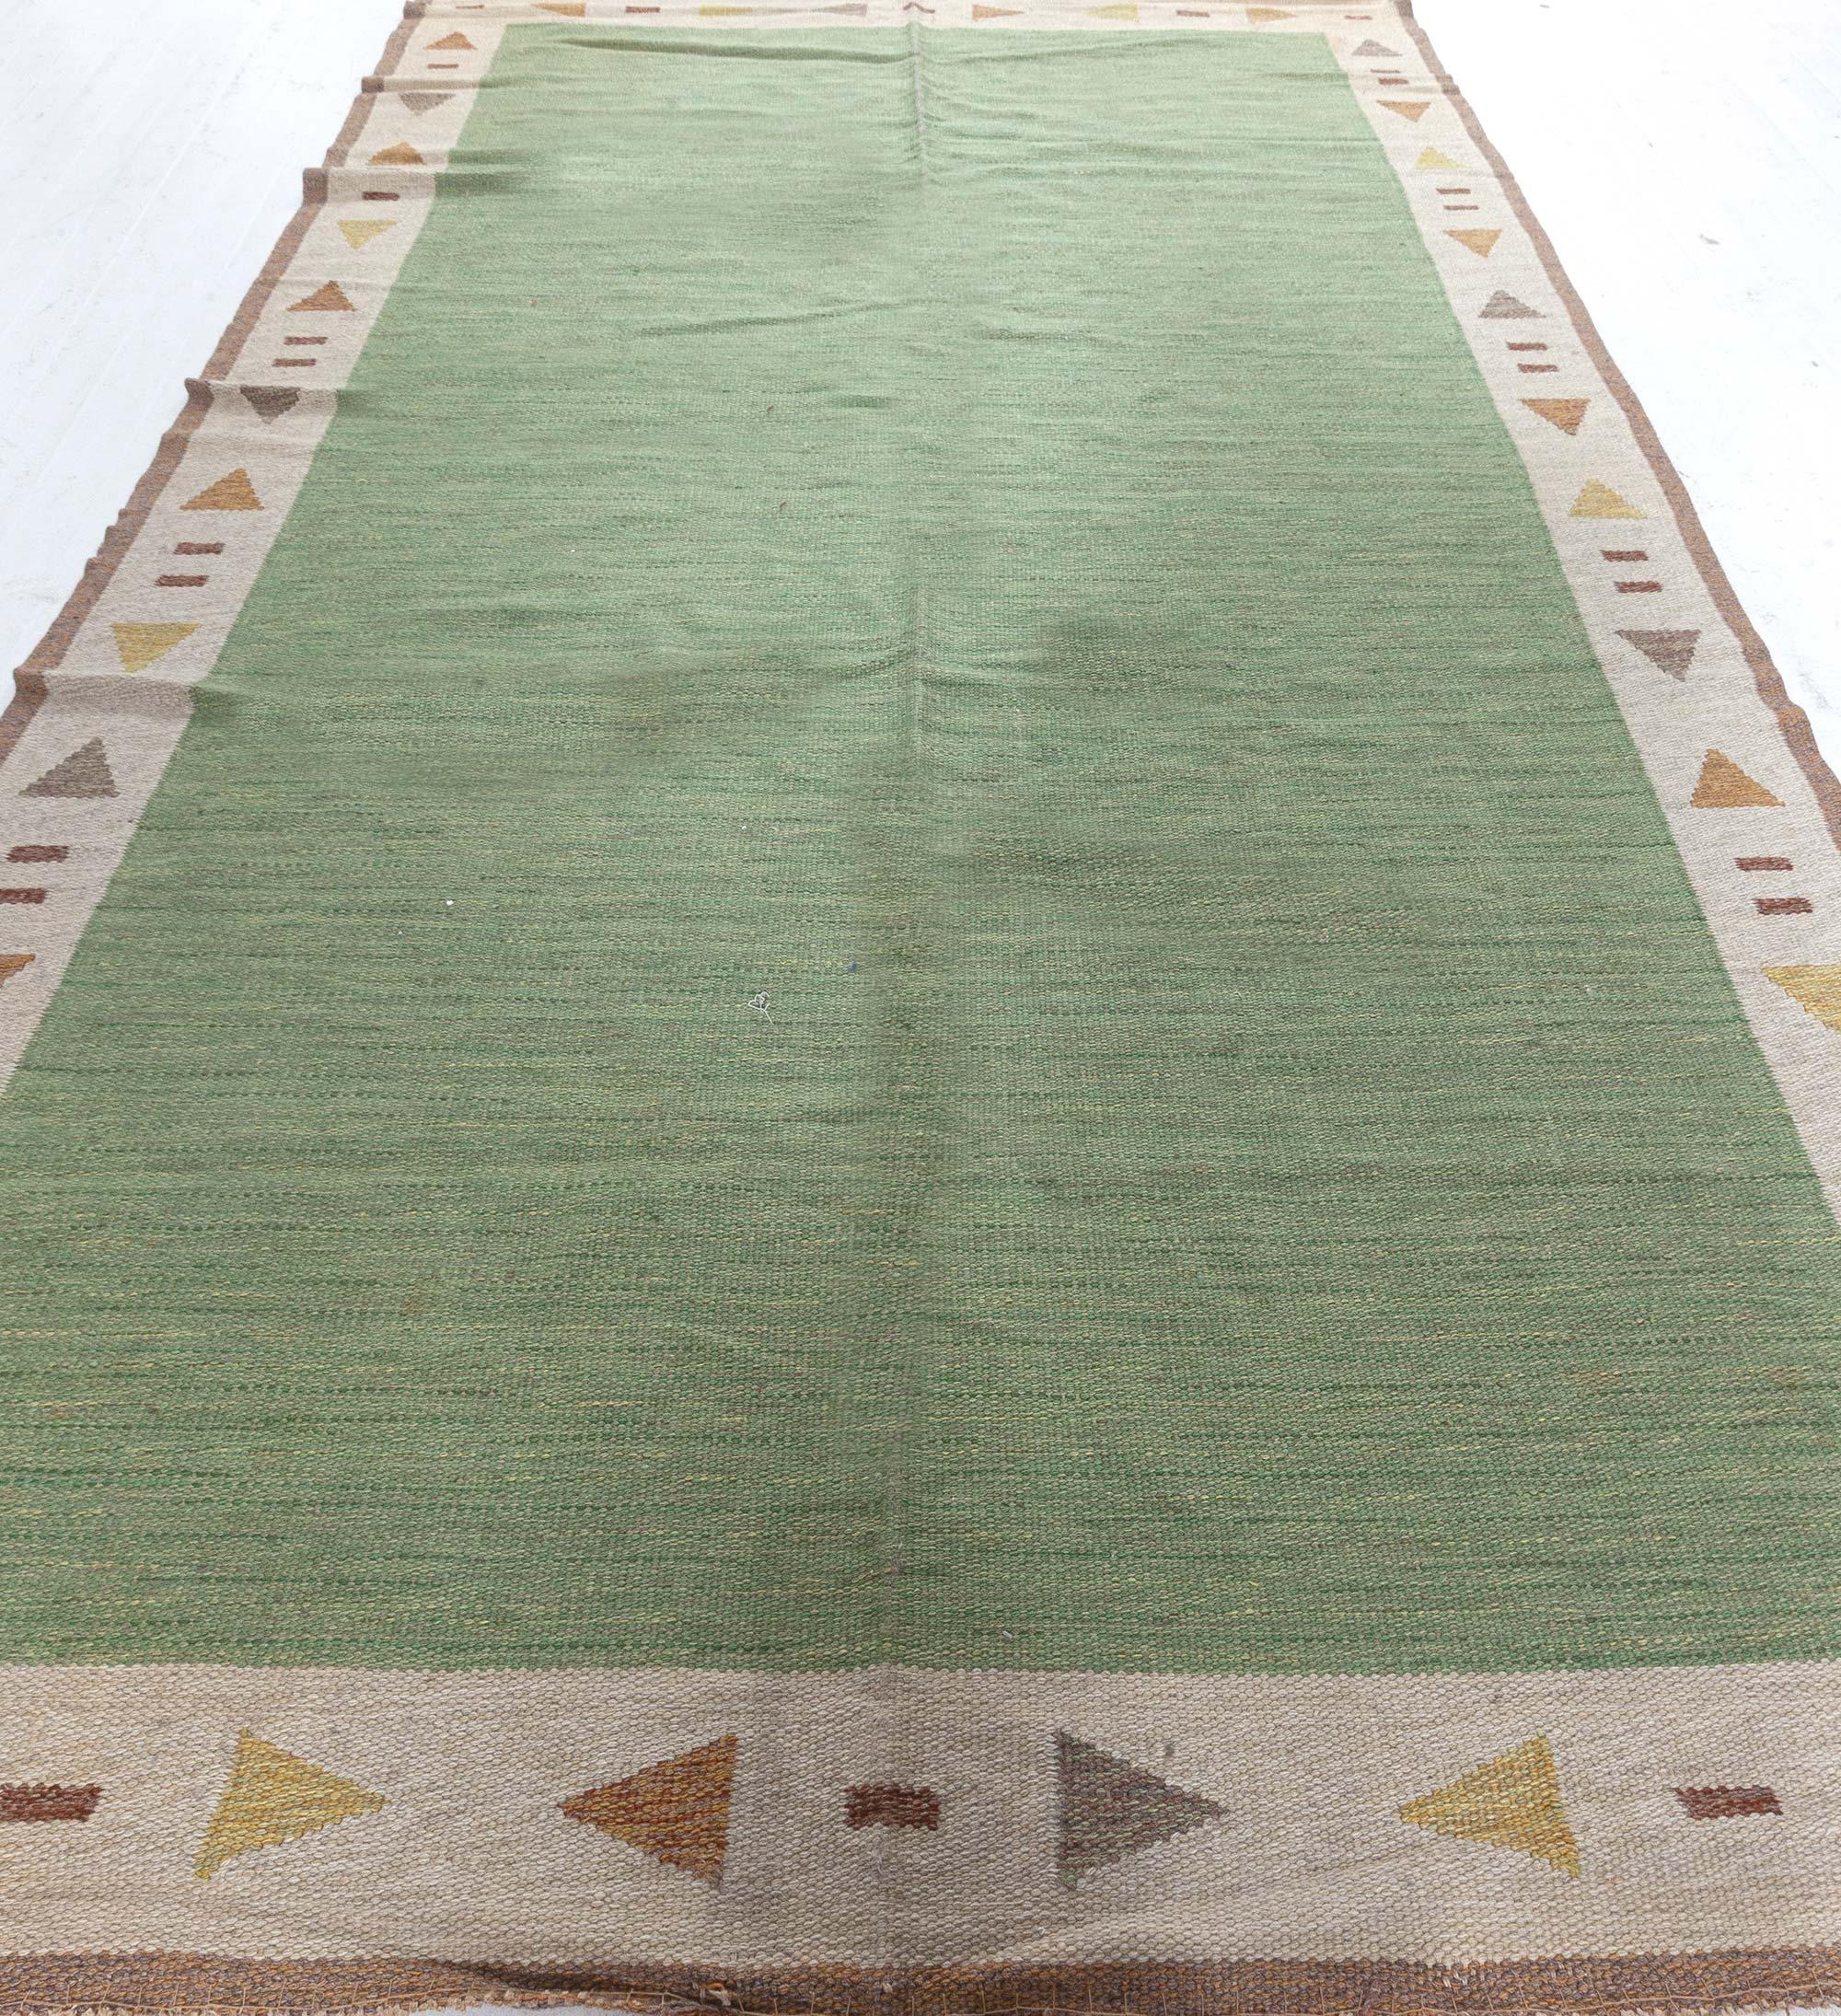 Hand-Woven Mid-20th Century Green Swedish Flat-Woven Rug For Sale